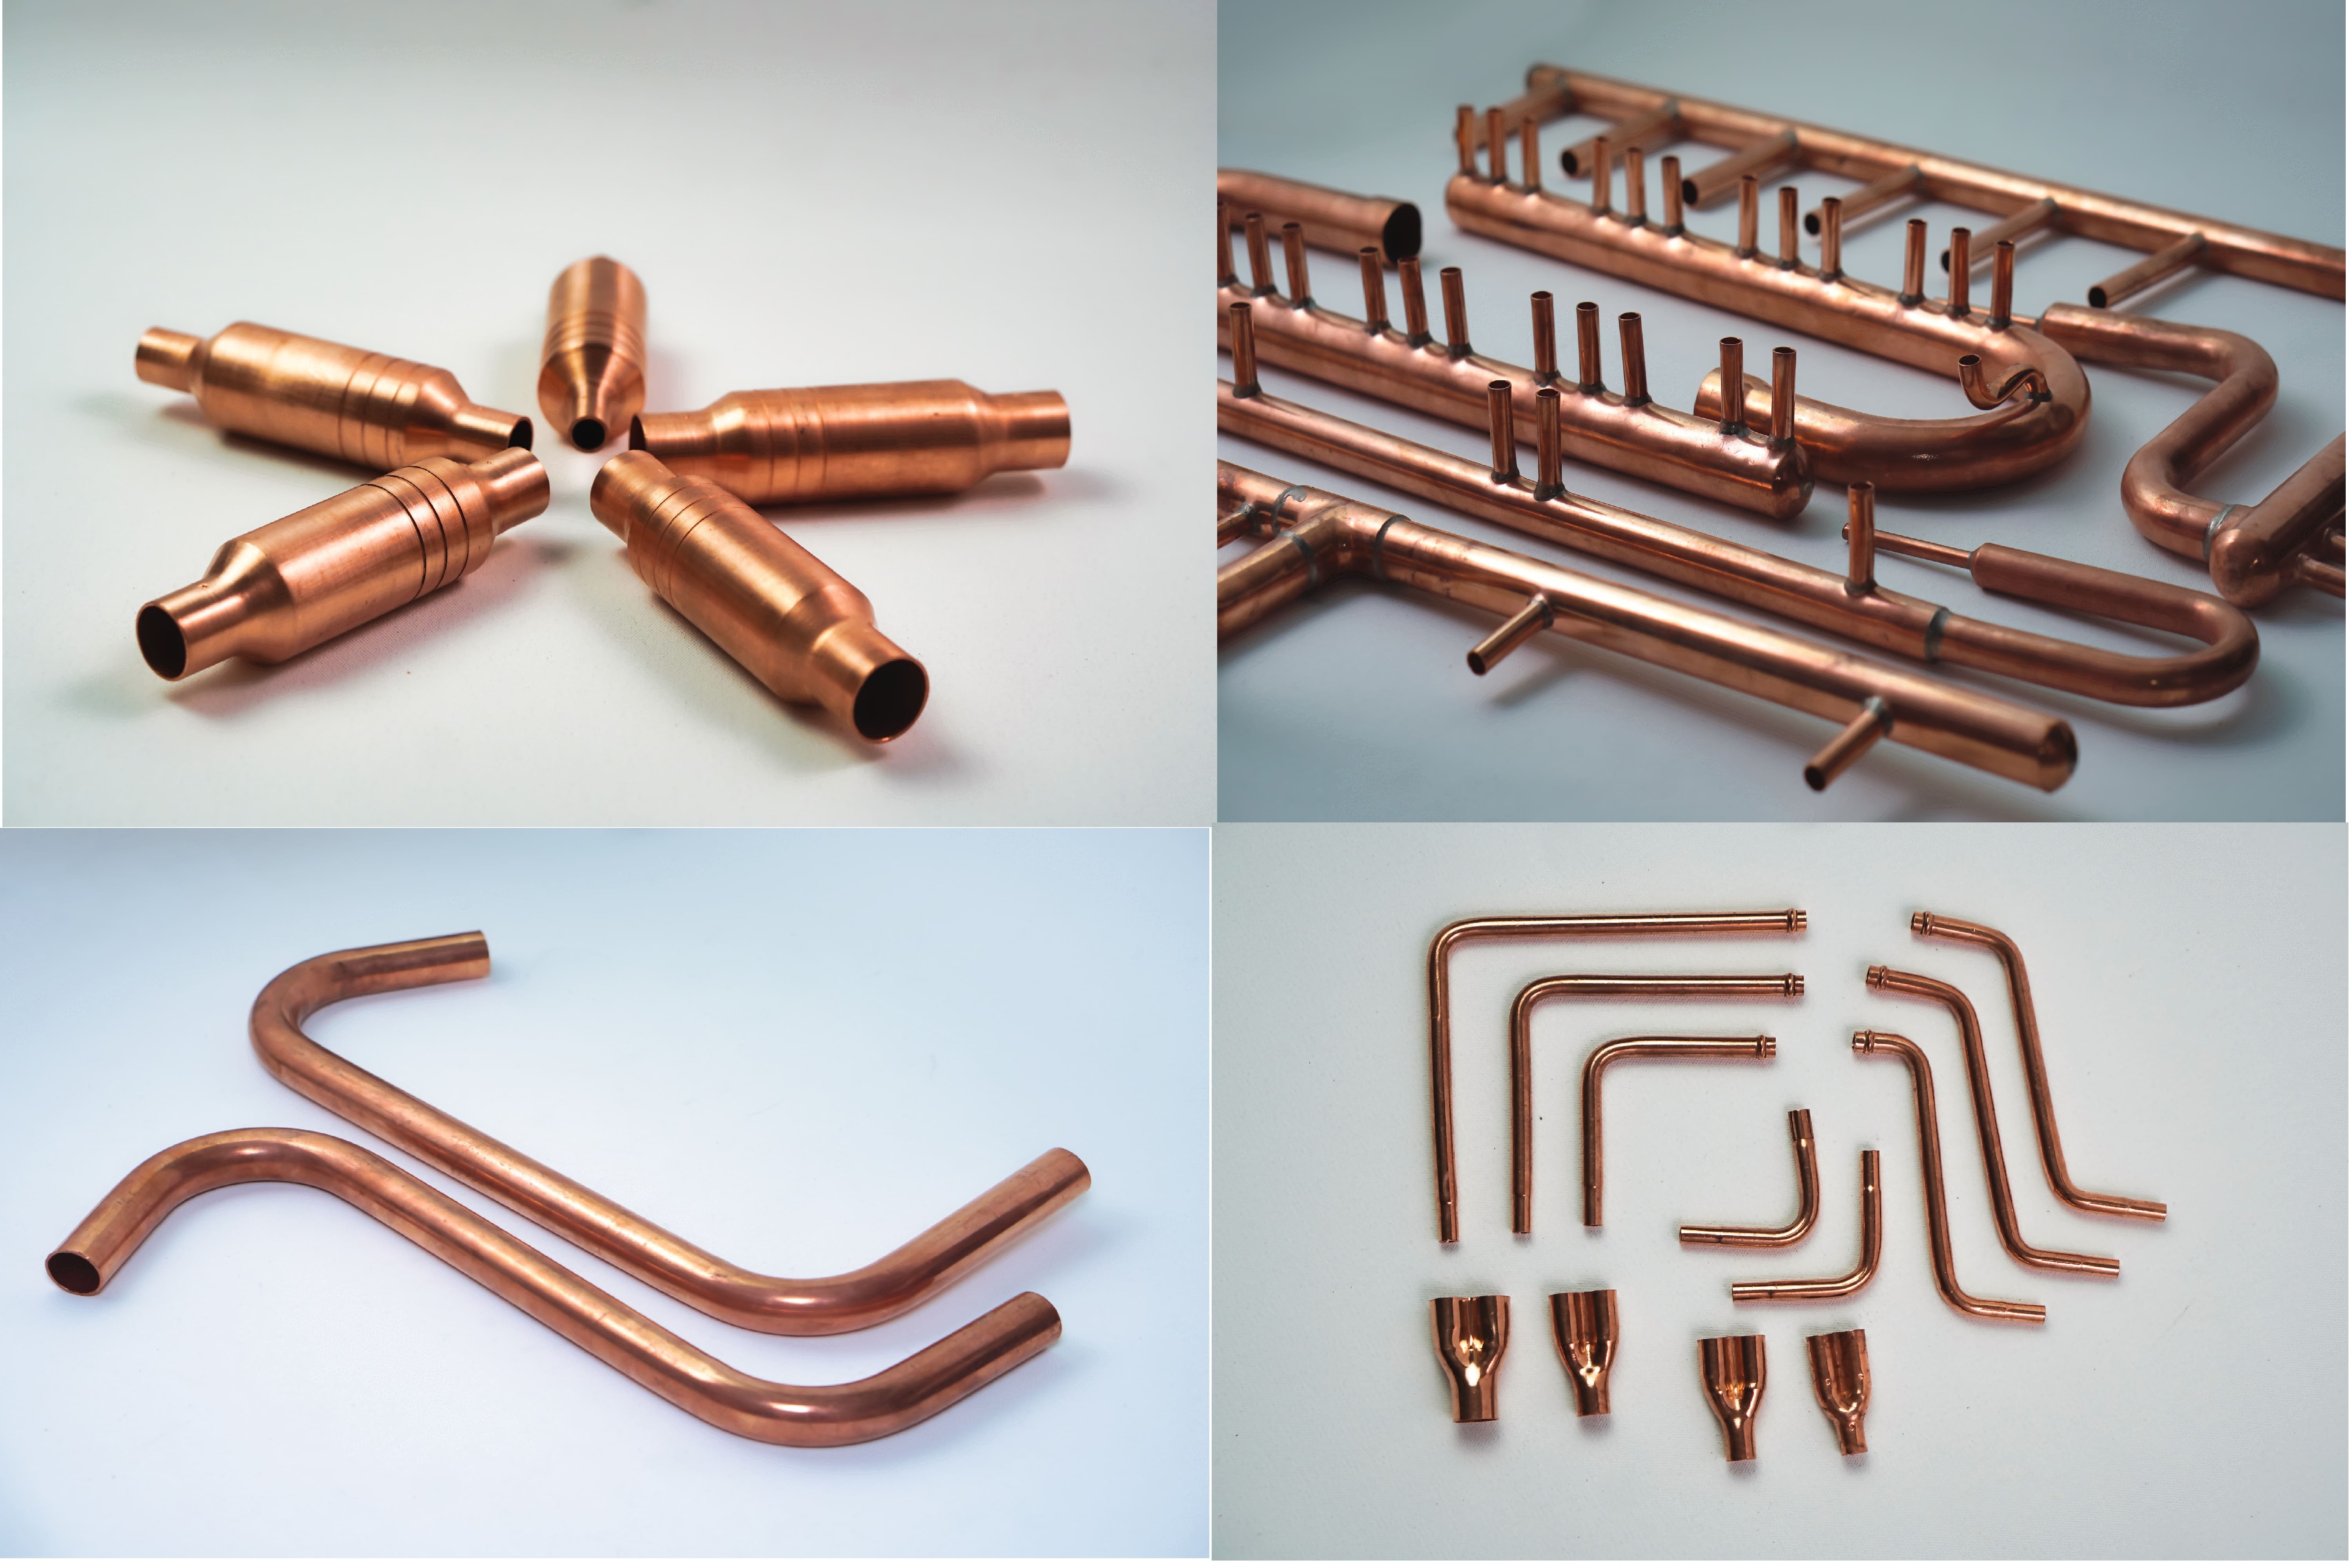 Copper Component and assemblies